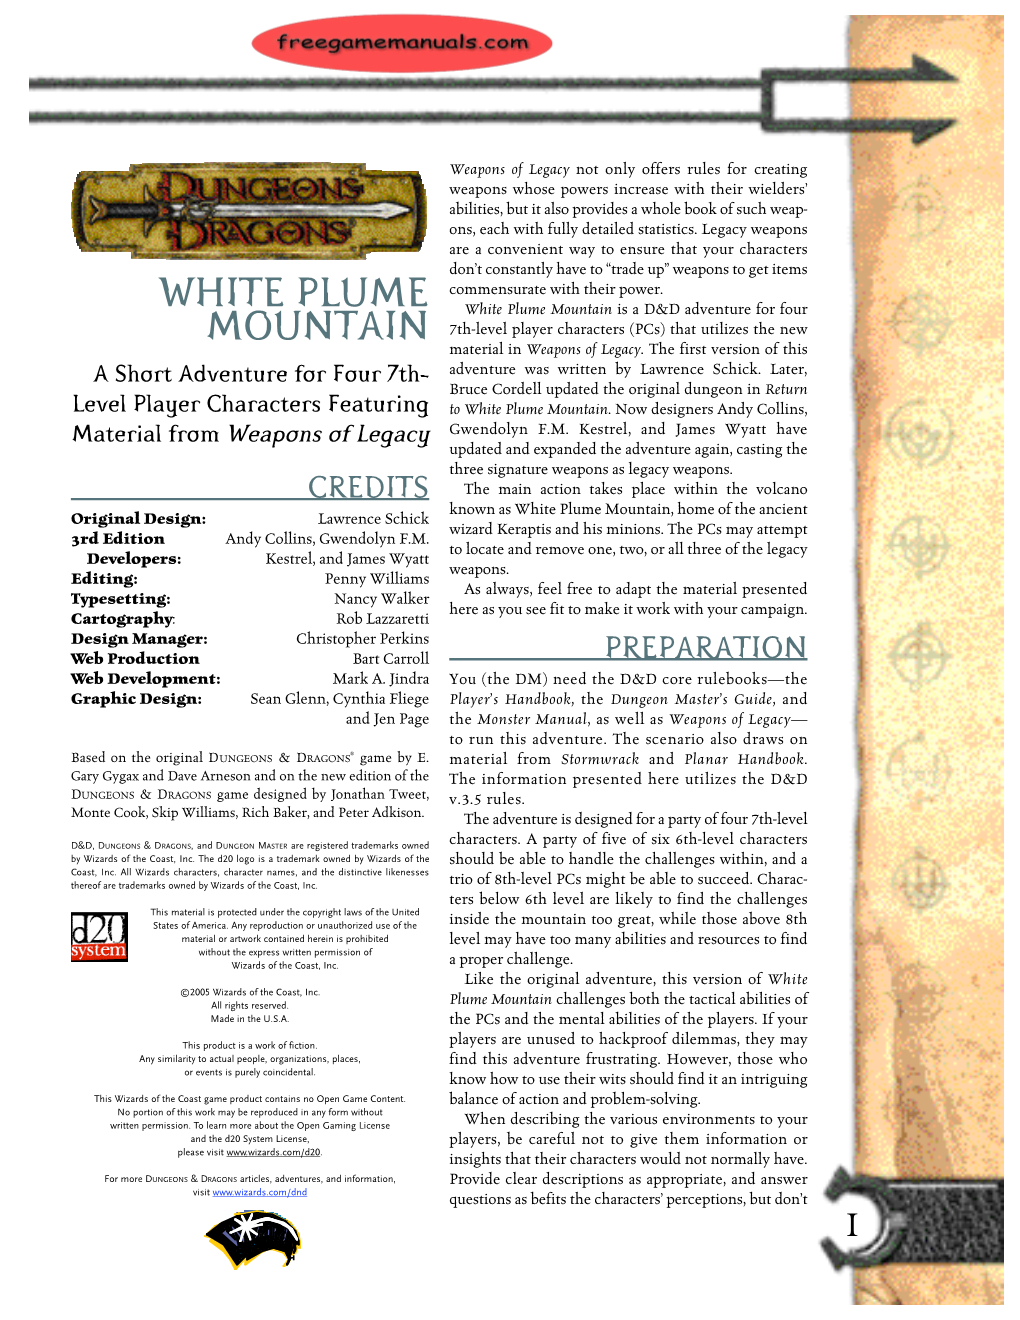 White Plume Mountain Is a D&D Adventure for Four MOUNTAIN 7Th-Level Player Characters (Pcs) That Utilizes the New Material in Weapons of Legacy